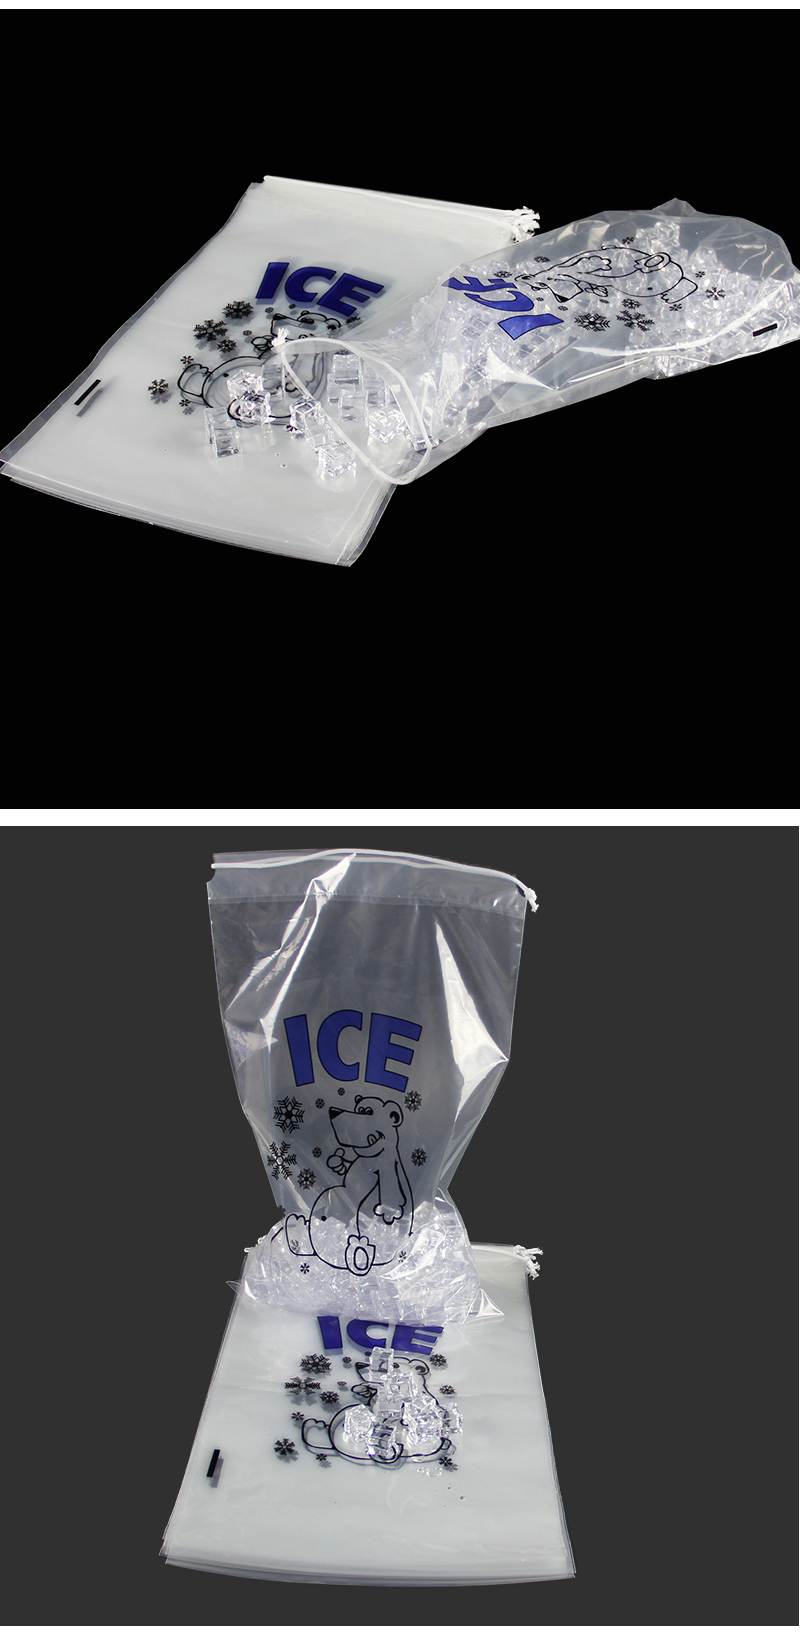 disposable ice bag